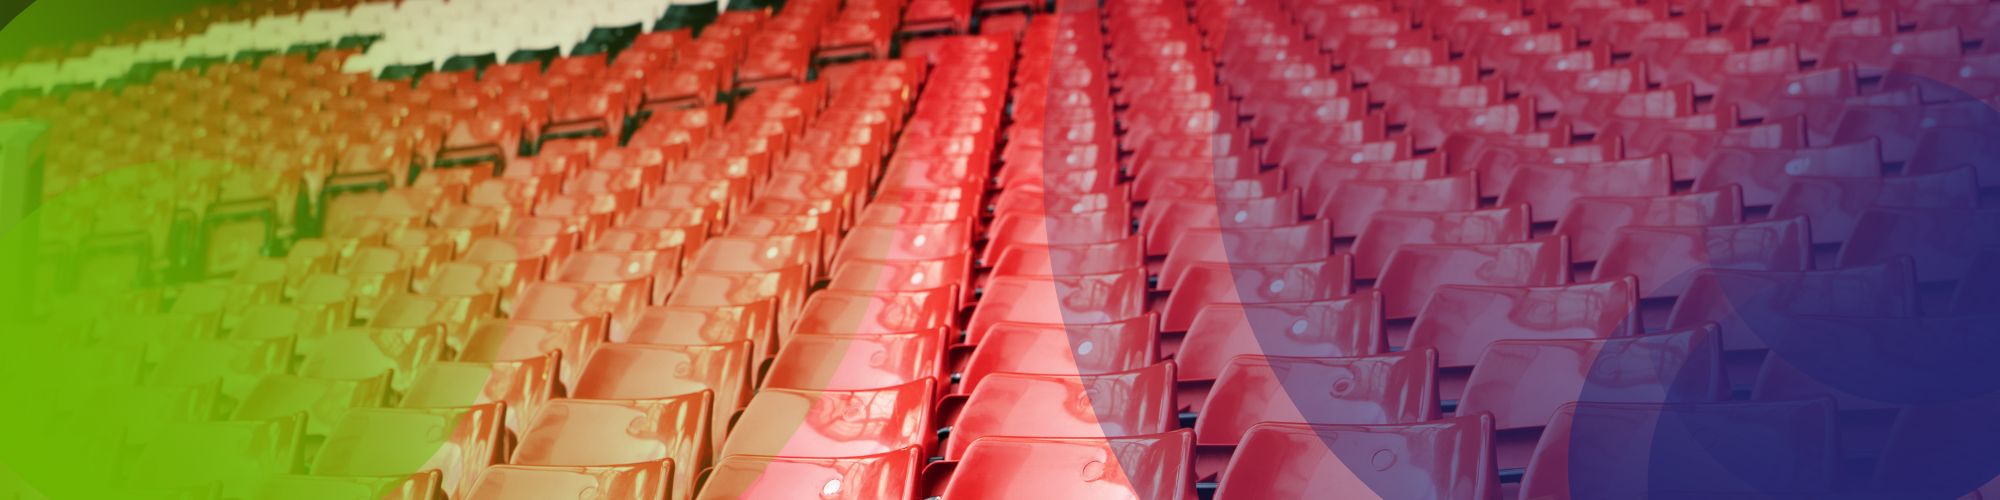 Liverpool FC's Anfield Road Stand Expansion Granted Planning Permission, Paving the Way for Enhanced Stadium Experience